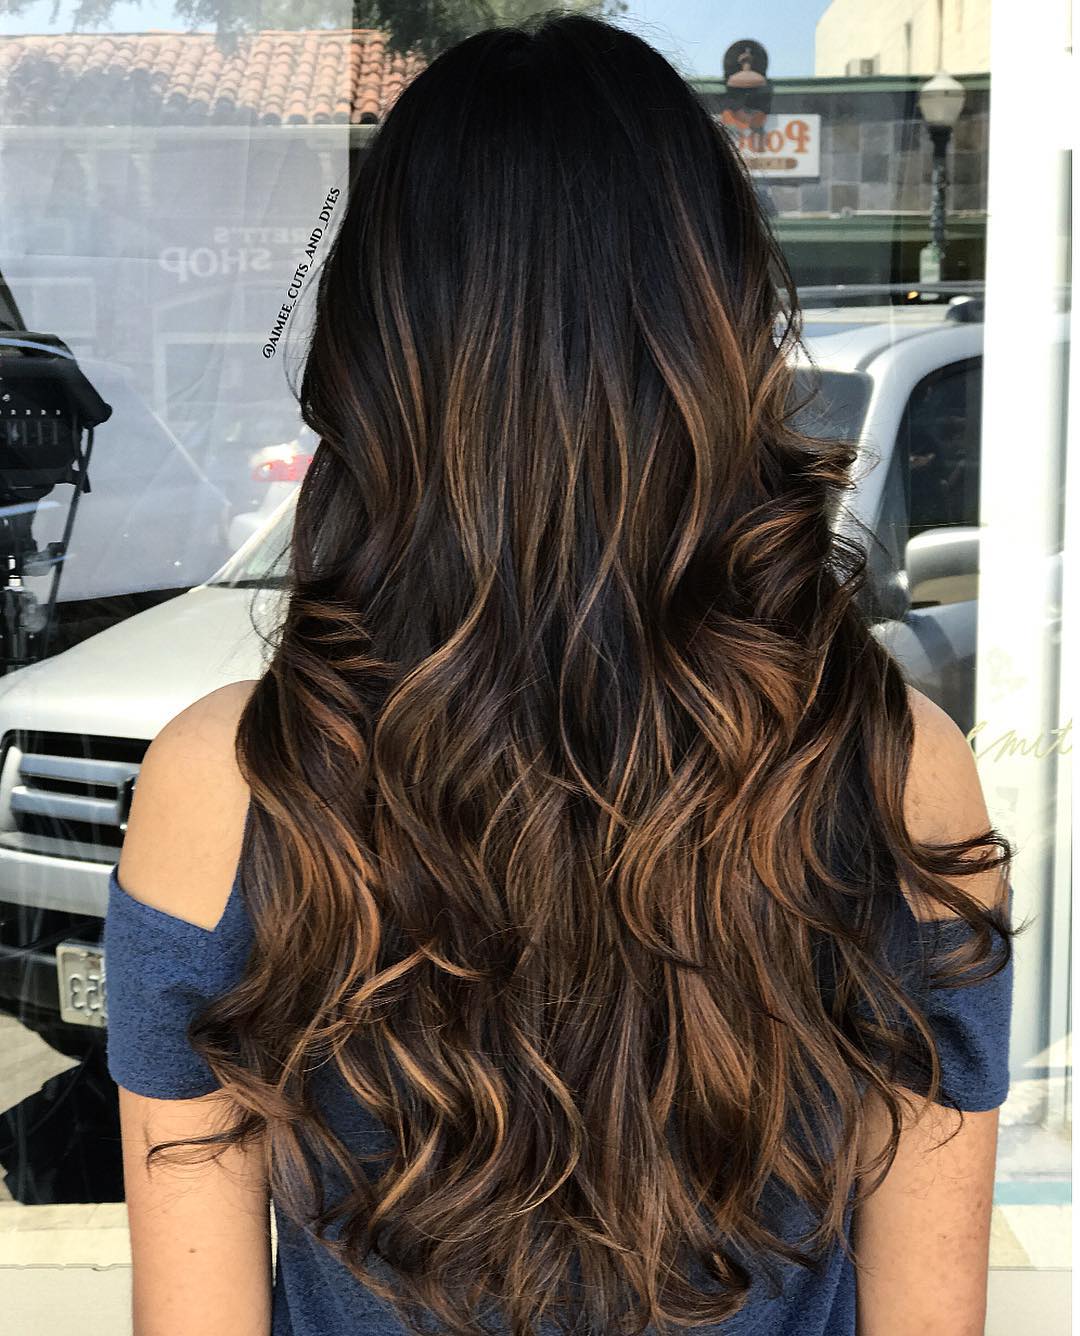 Long Curly Dark Brown Hairstyle With Highlights